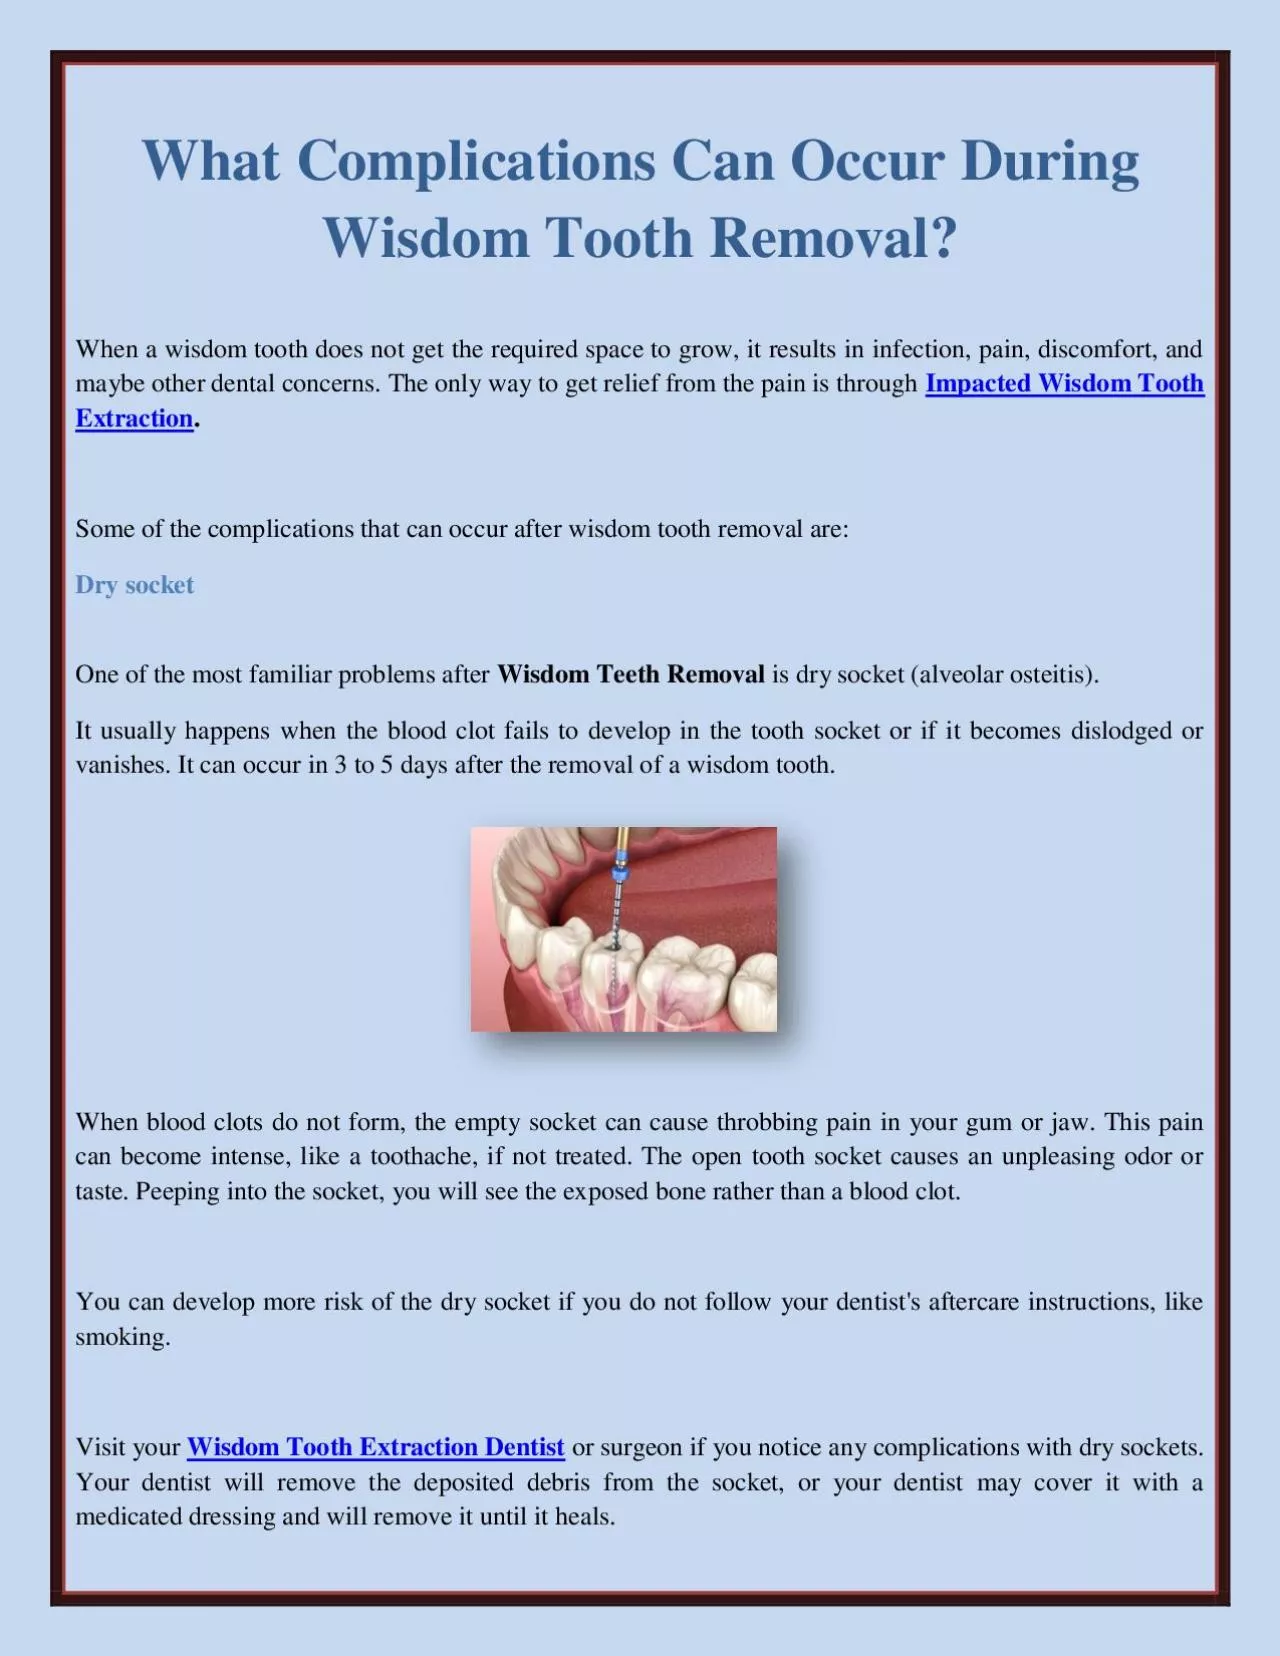 What Complications Can Occur During Wisdom Tooth Removal?